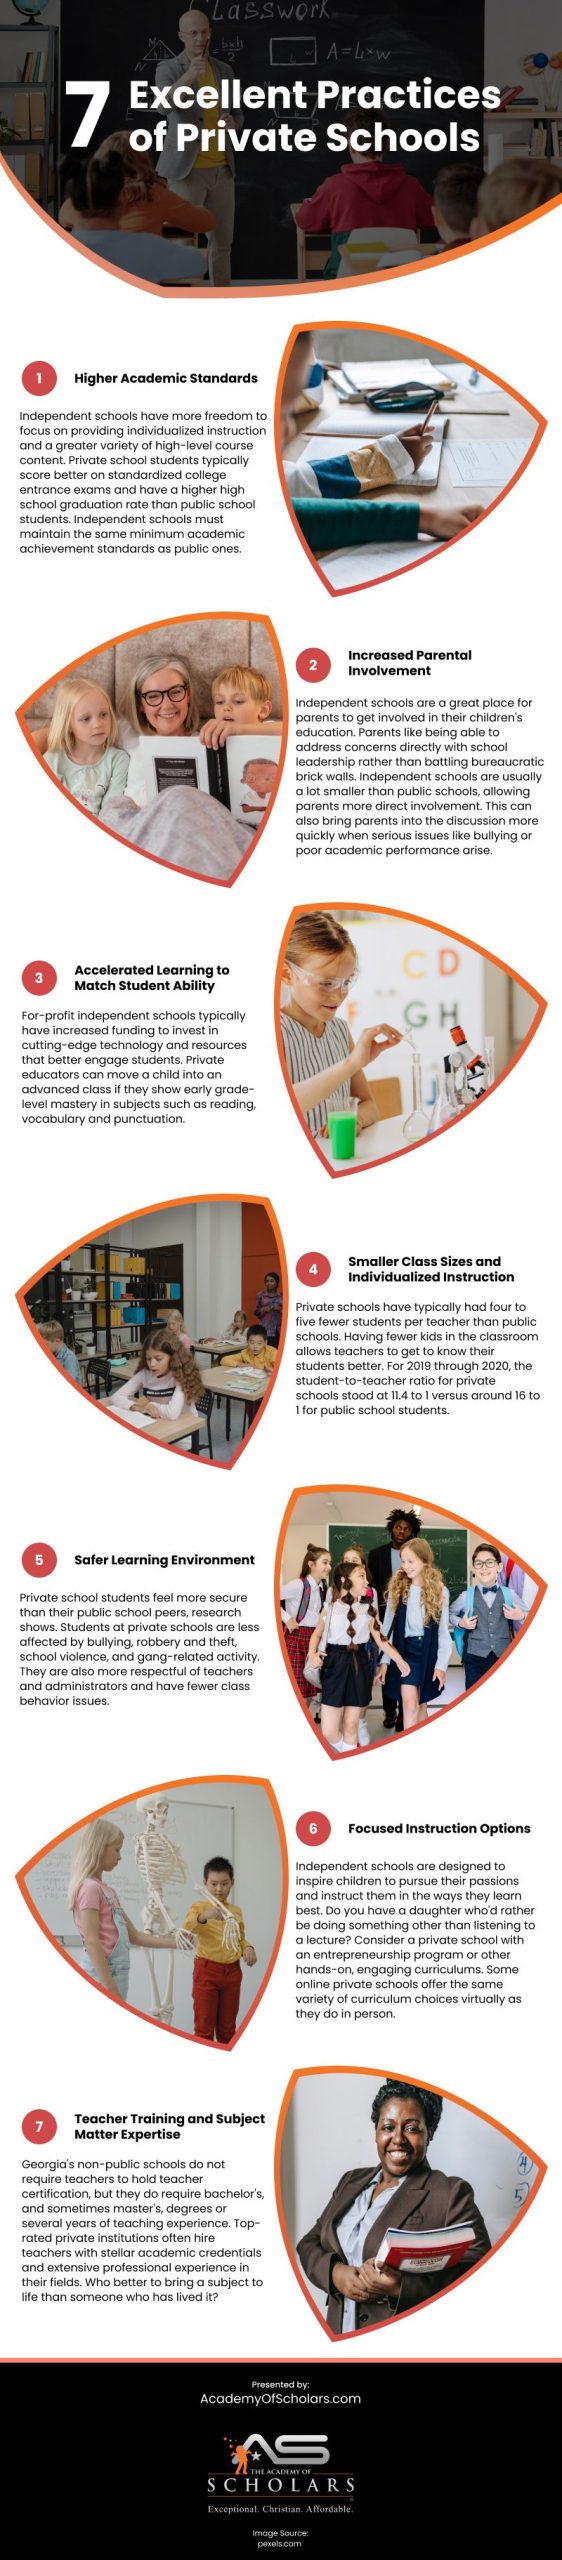 7 Excellent Practices of Private Schools Infographic